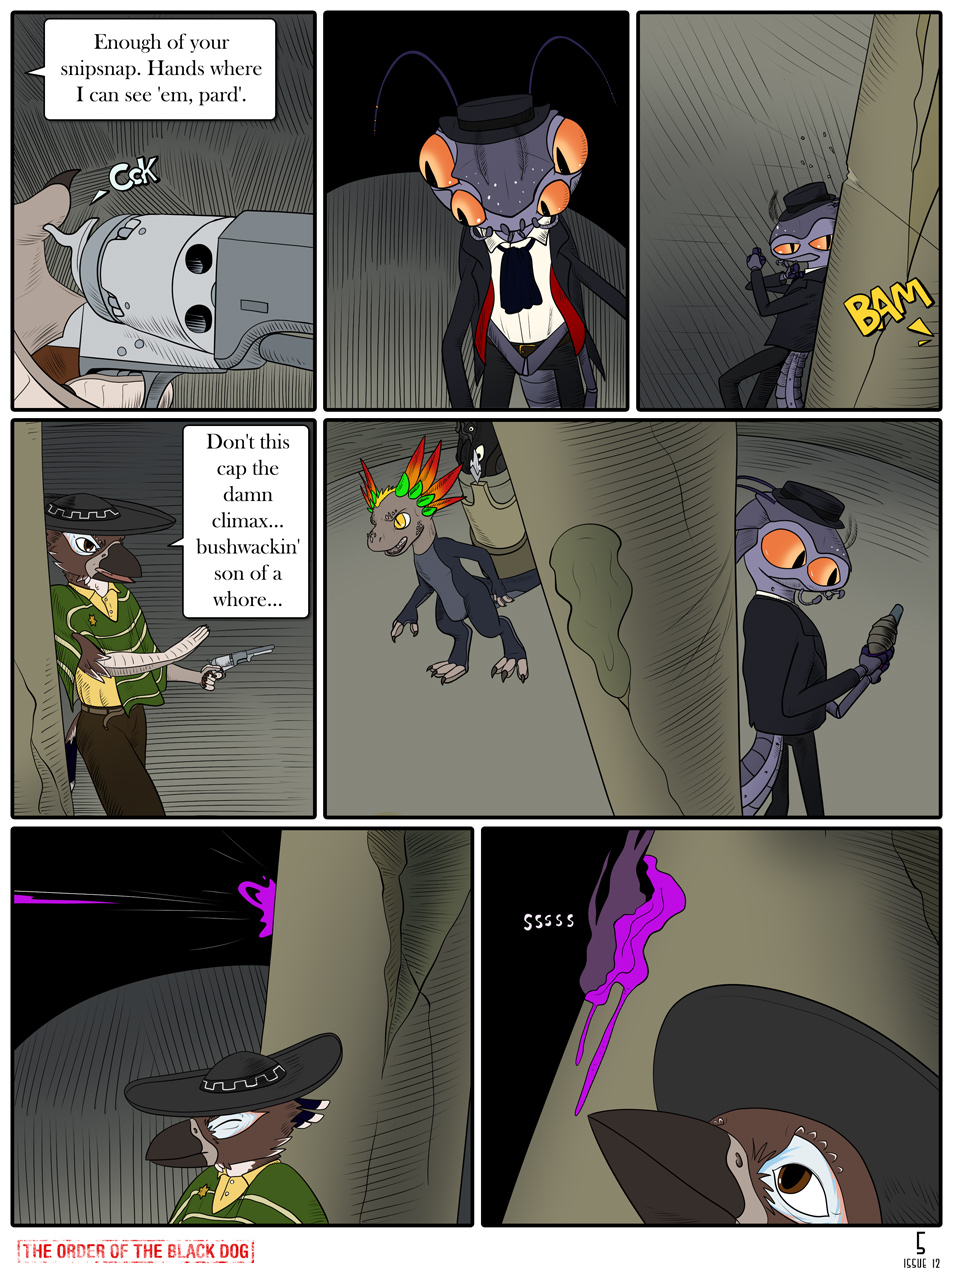 Issue 12, Page 5